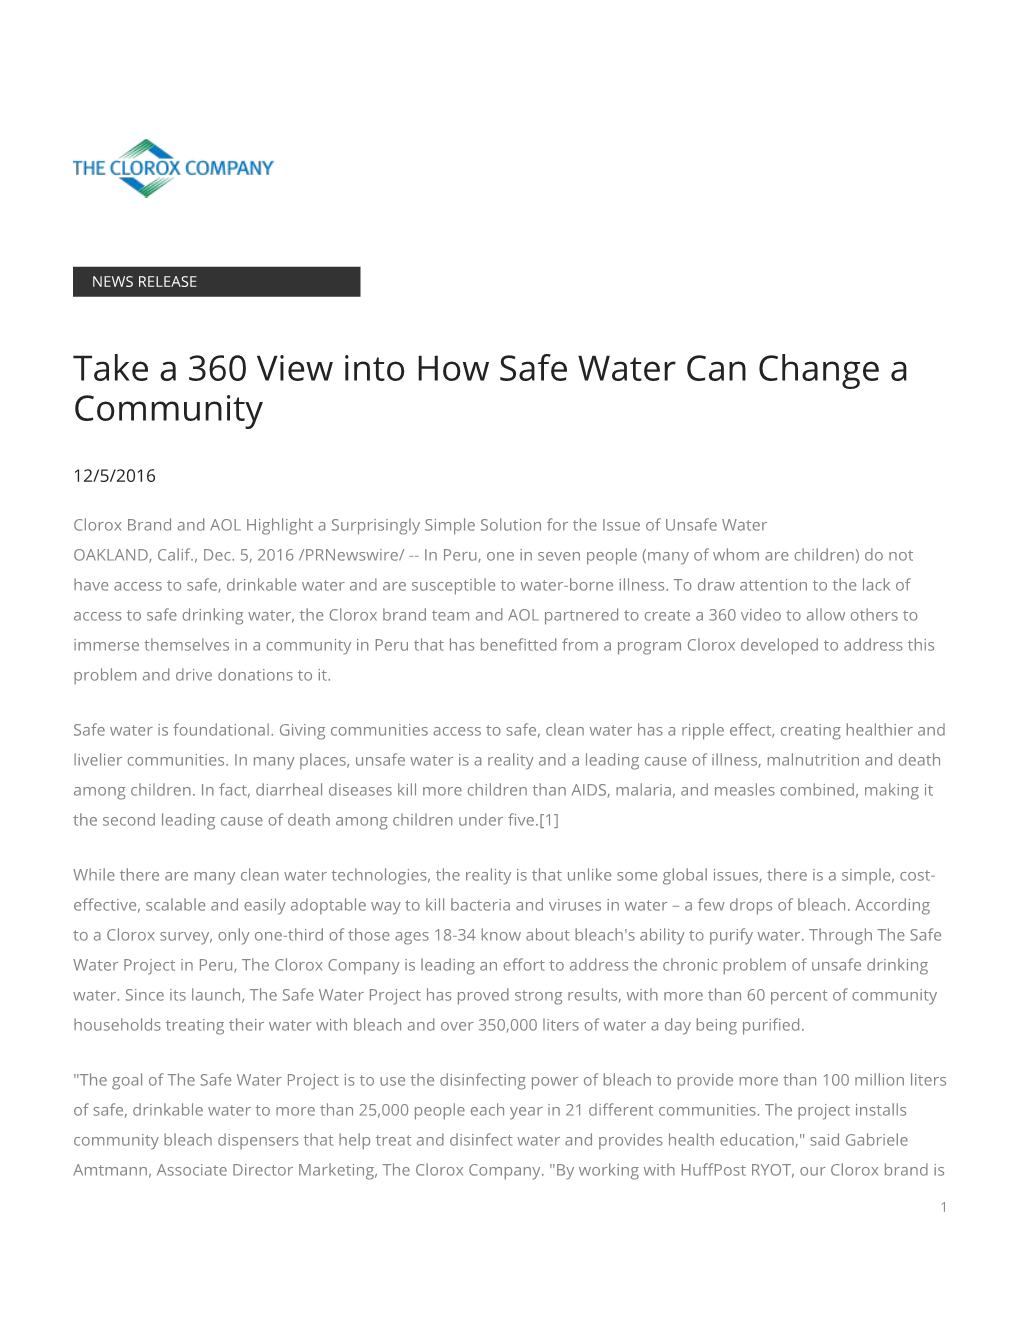 Take a 360 View Into How Safe Water Can Change a Community